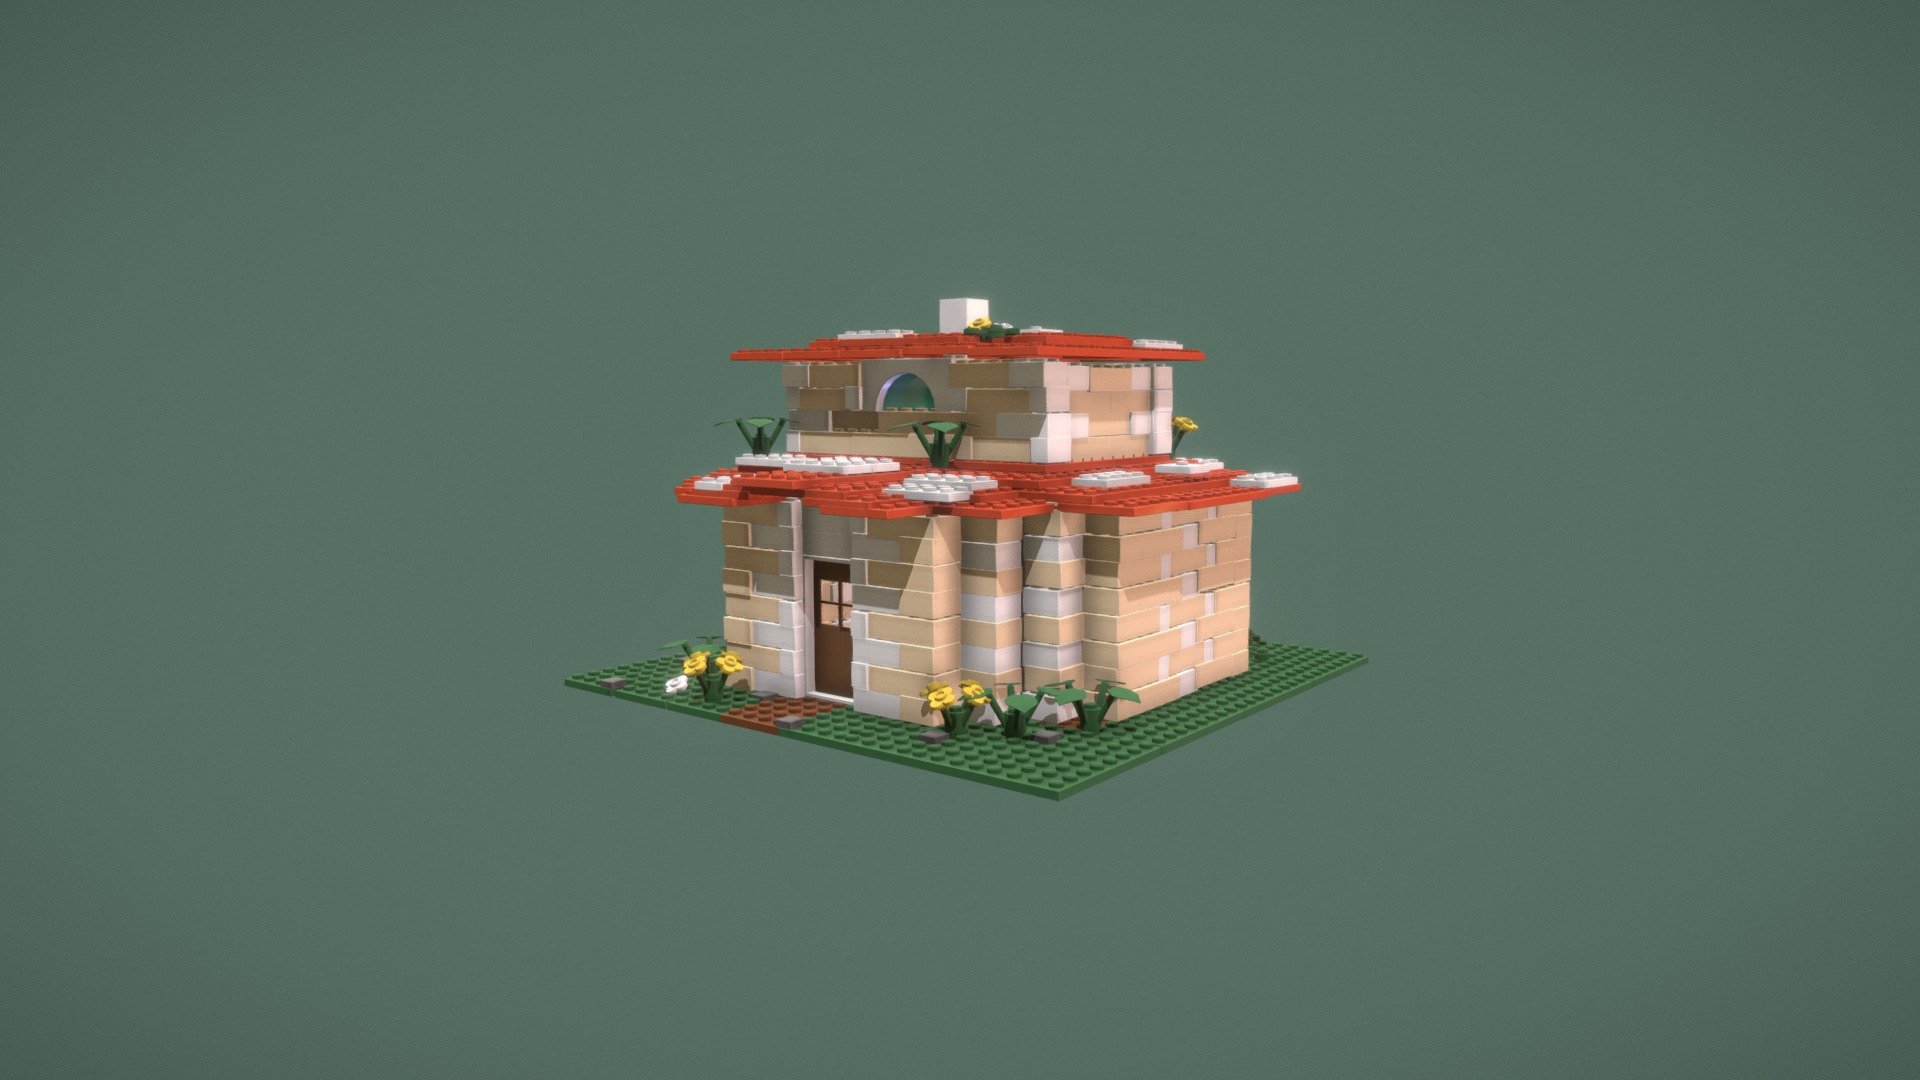 a simplistic mushroom styled cottage created with 3d moddled lego.it contains some simple detain and has many askew bricks to add depth and texture 3d model